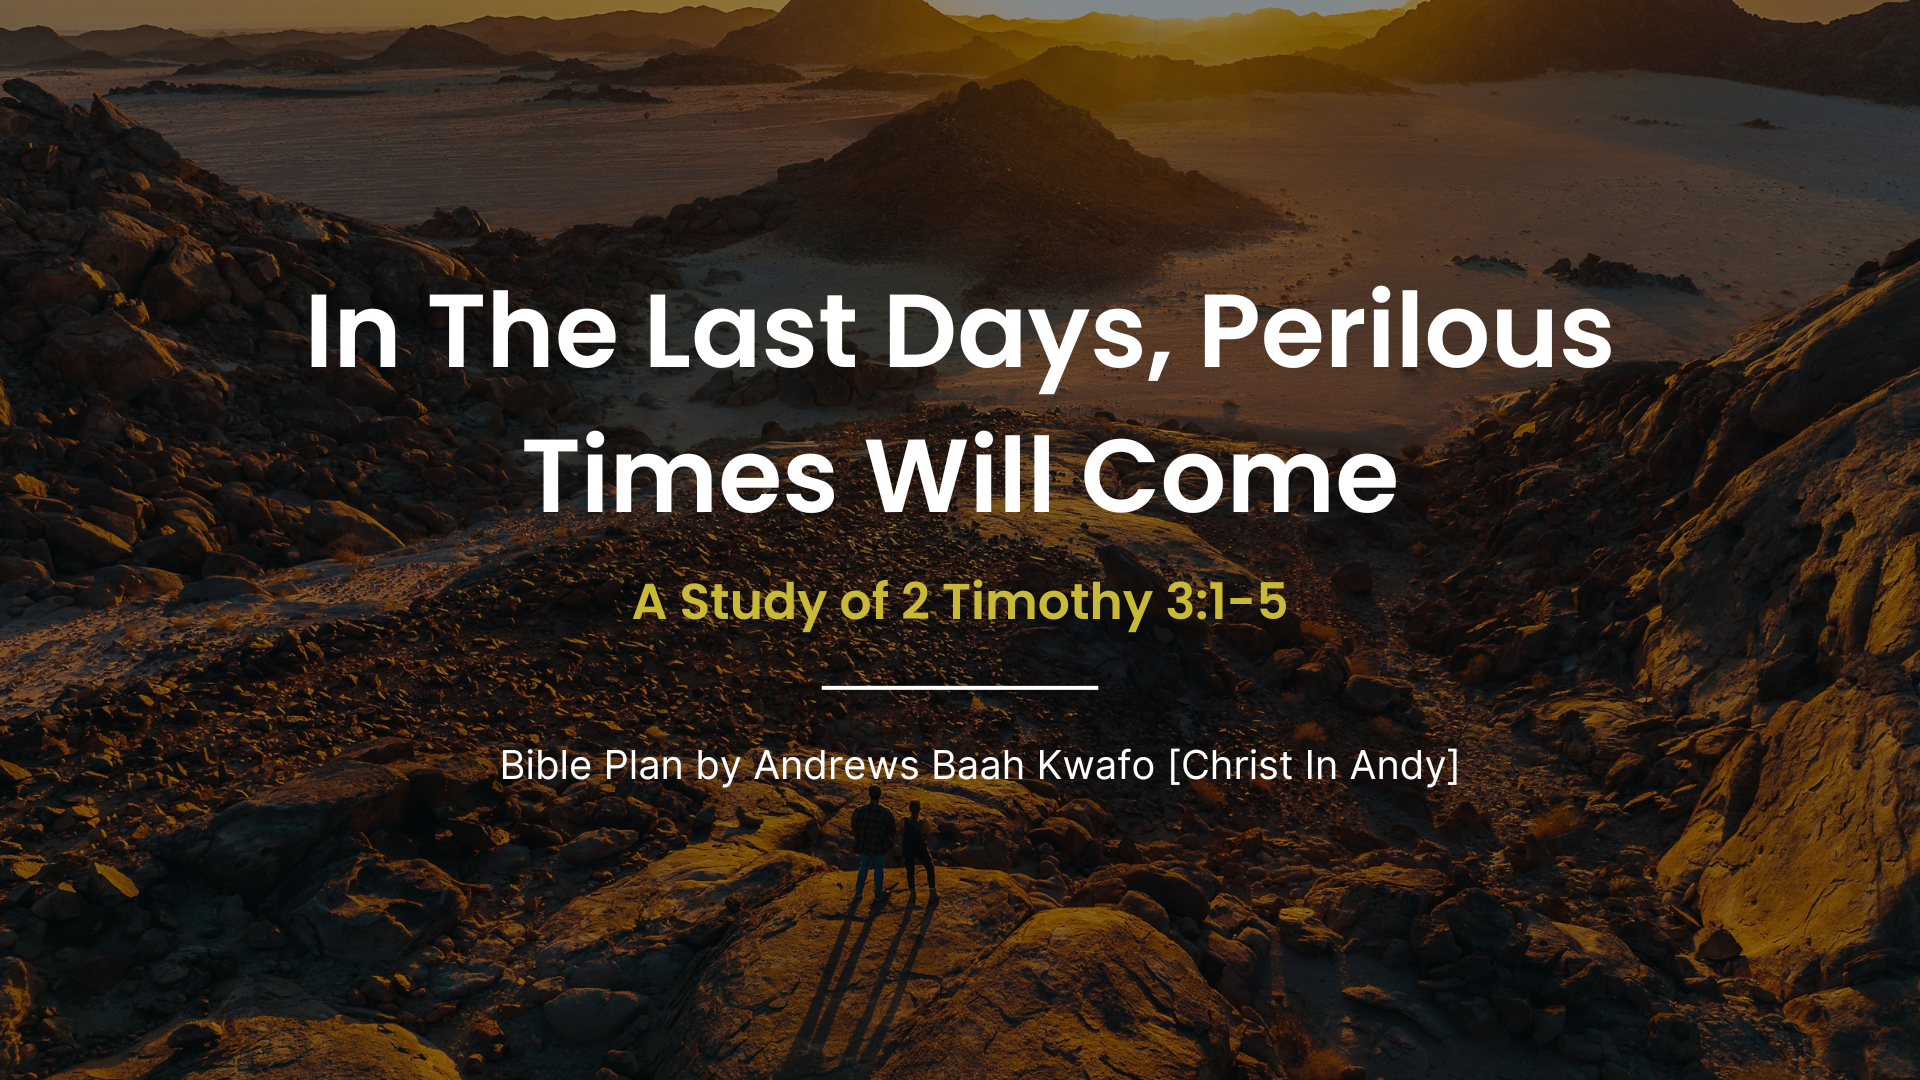 Bible Plan - In The Last Days, Perilous Times Will Come [Extended]